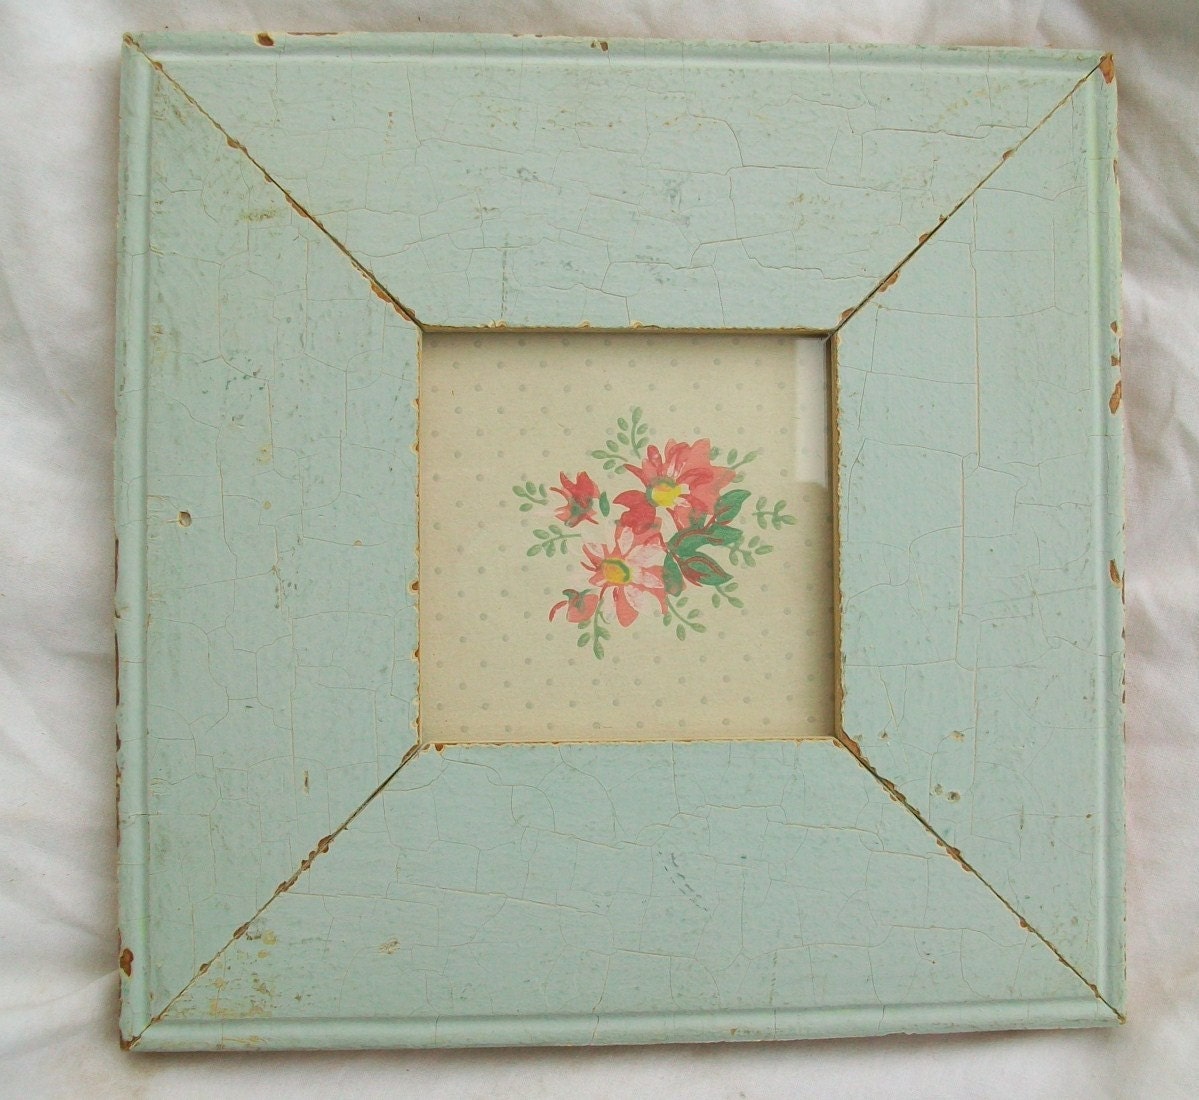 Old New York Architectural Salvaged Wood Shabby Picture Frame Reclaimed Chic S7700